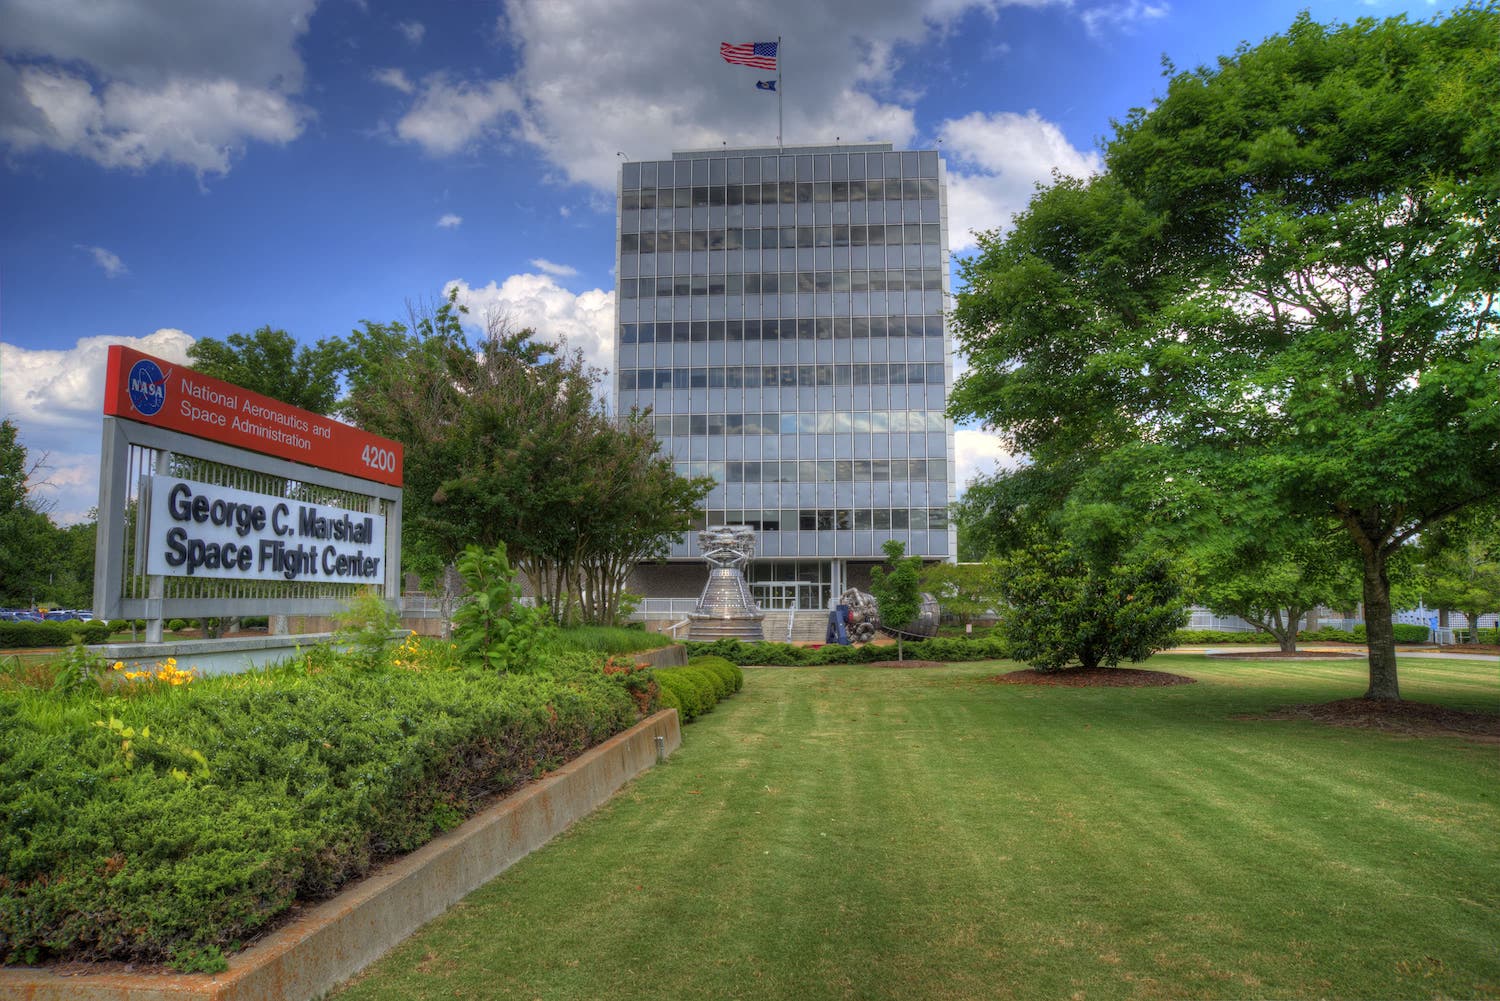 A beautiful, sunny day with a blue sky and white clouds. There is a mowed lawn with a tall building; an American Flag on top; a sign reading George C. Marshall Space Flight Center 